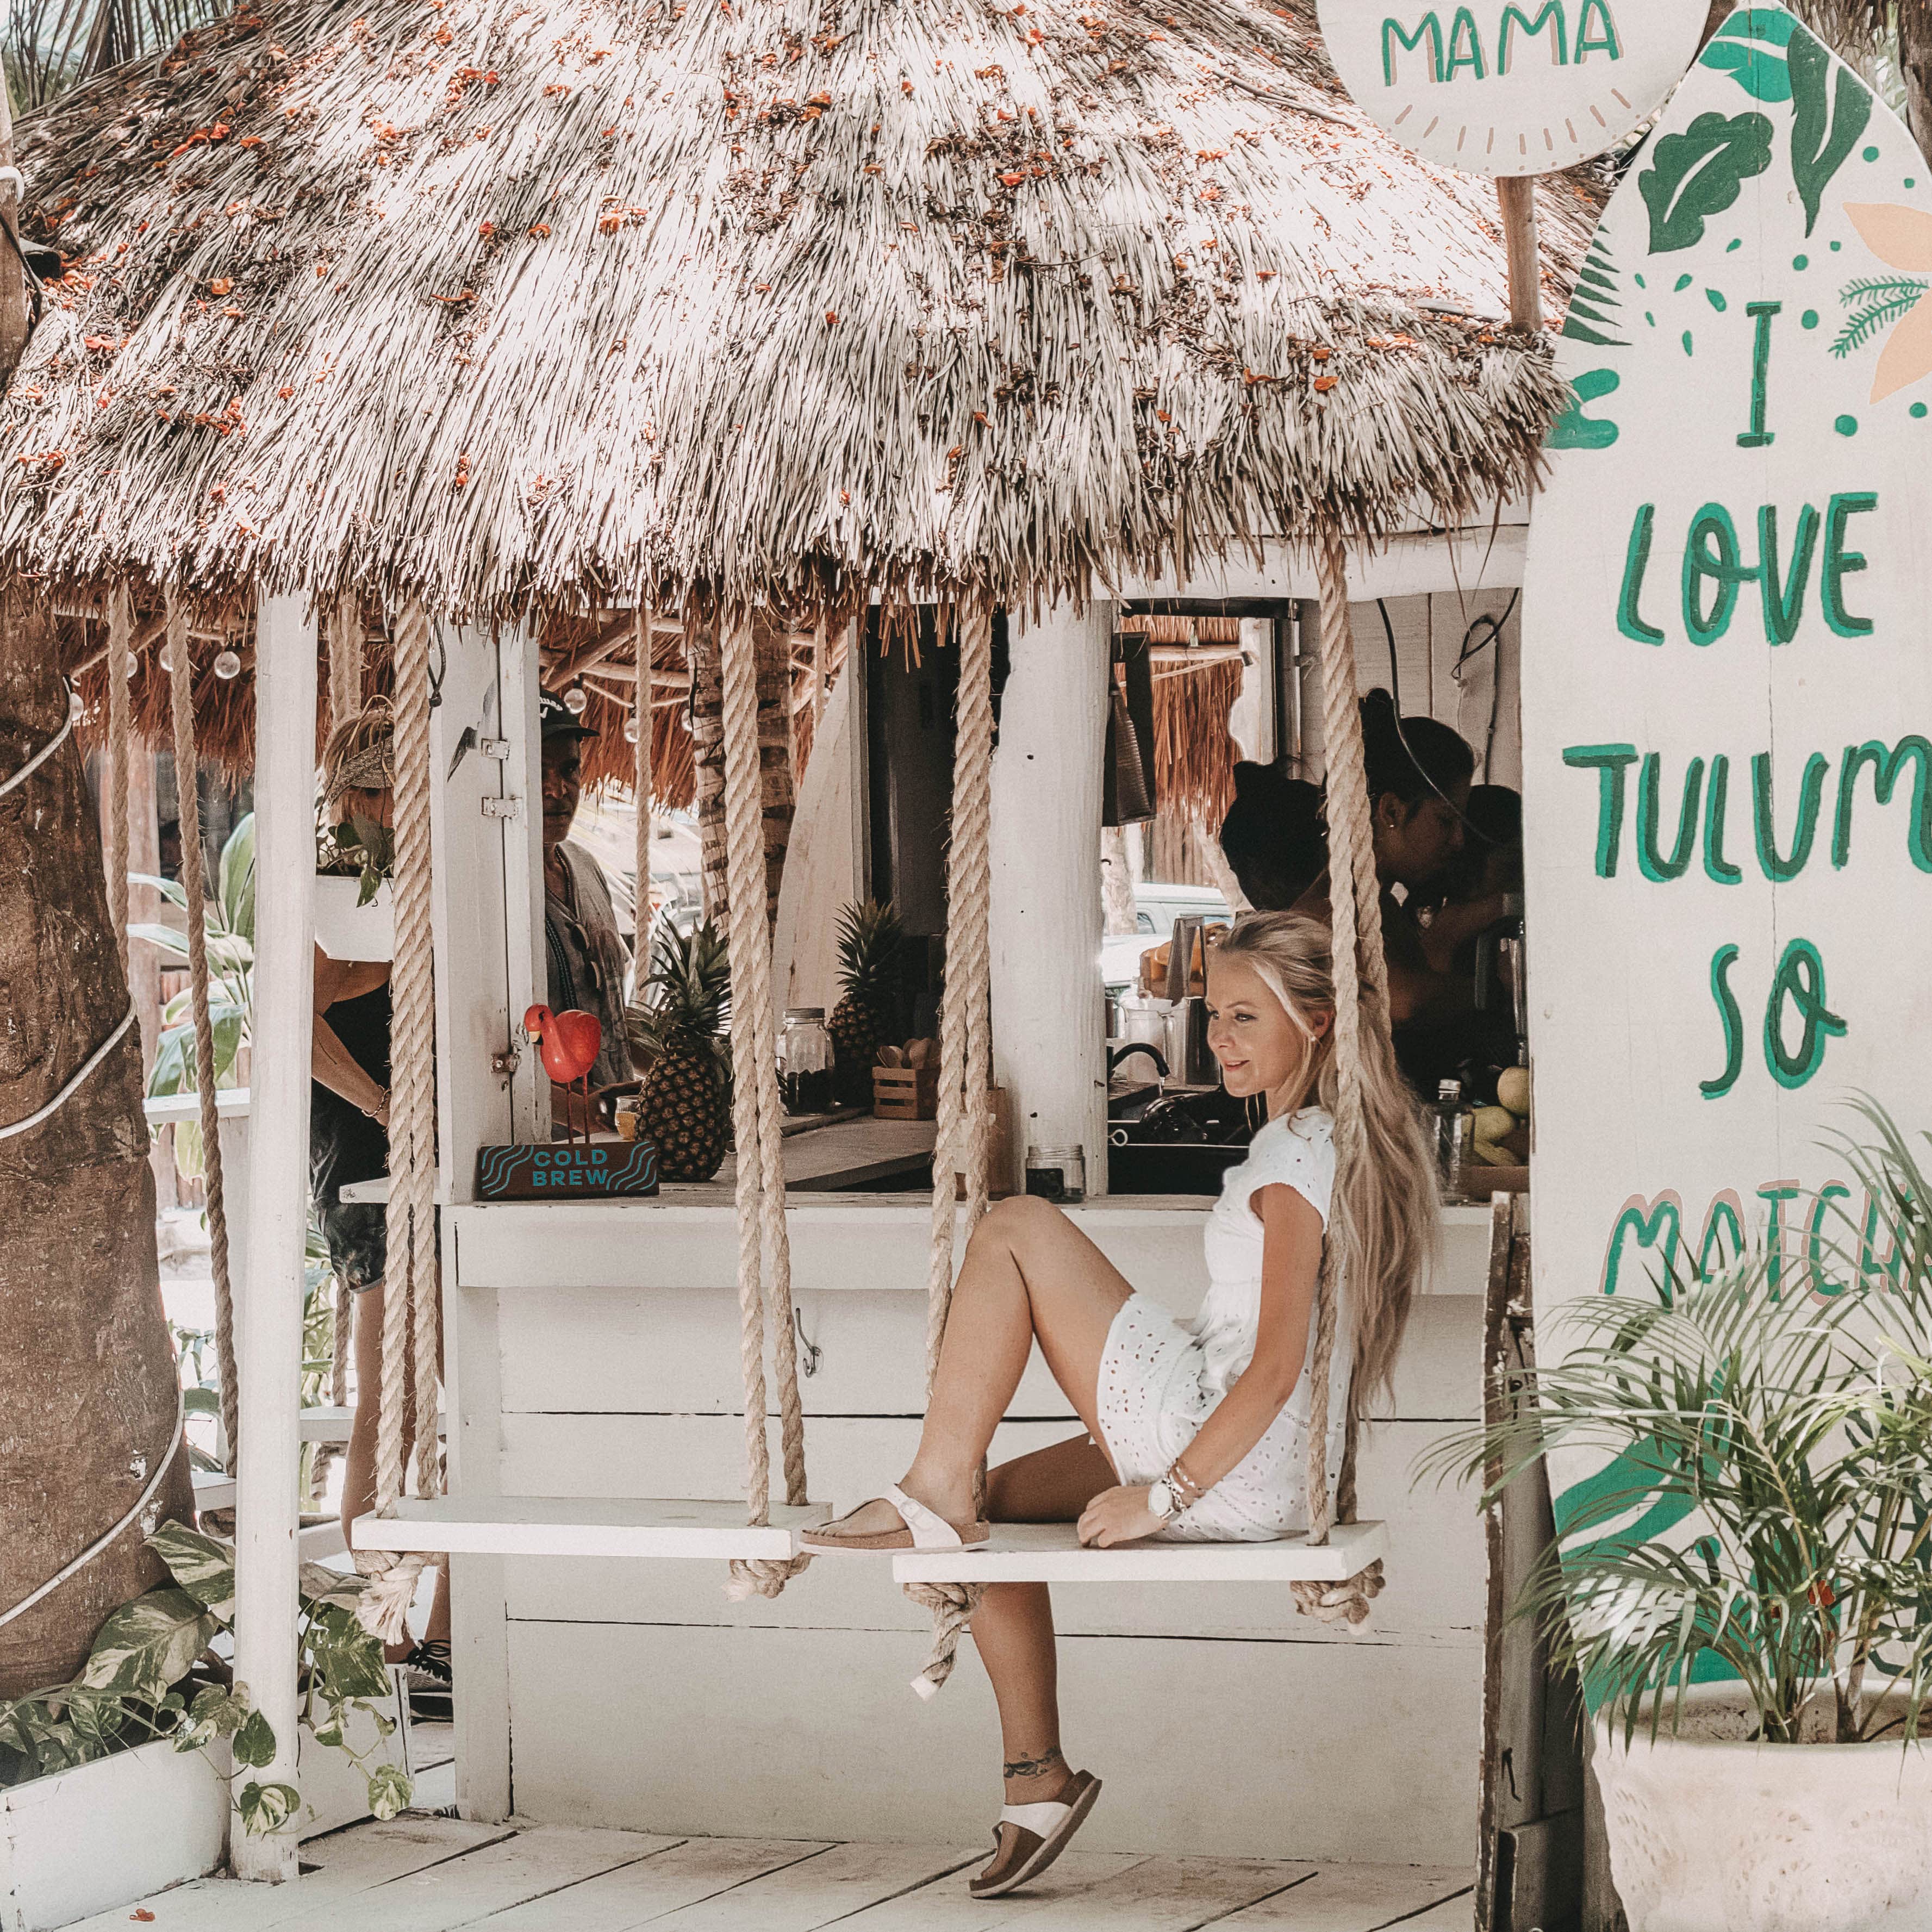 My restaurant recommendations in Cancun, Playa del Carmen and Tulum